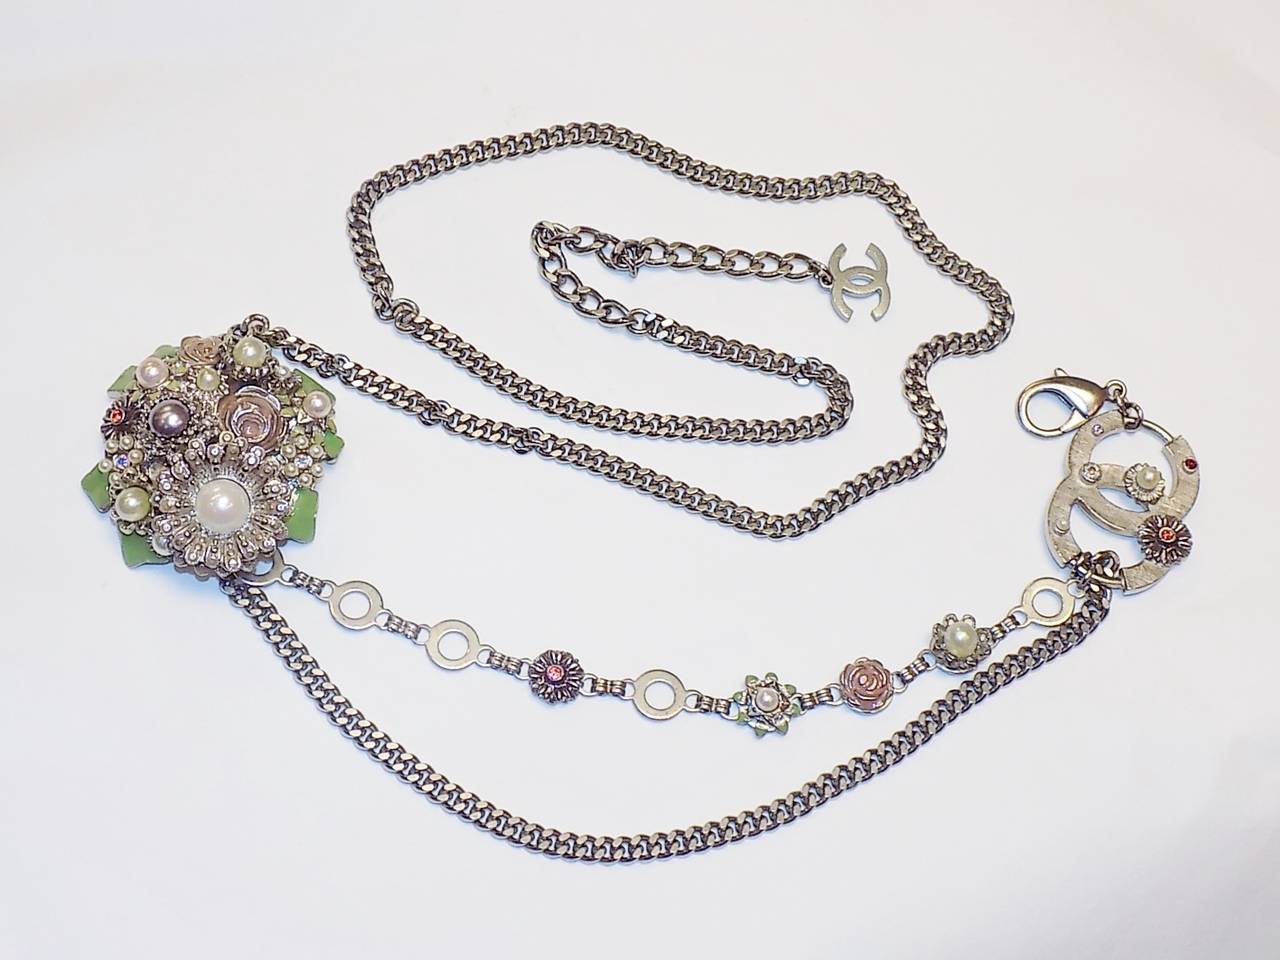 CHANEL chain  Belt with  Flower Crystal, Enamel, Pearl/ necklace 2